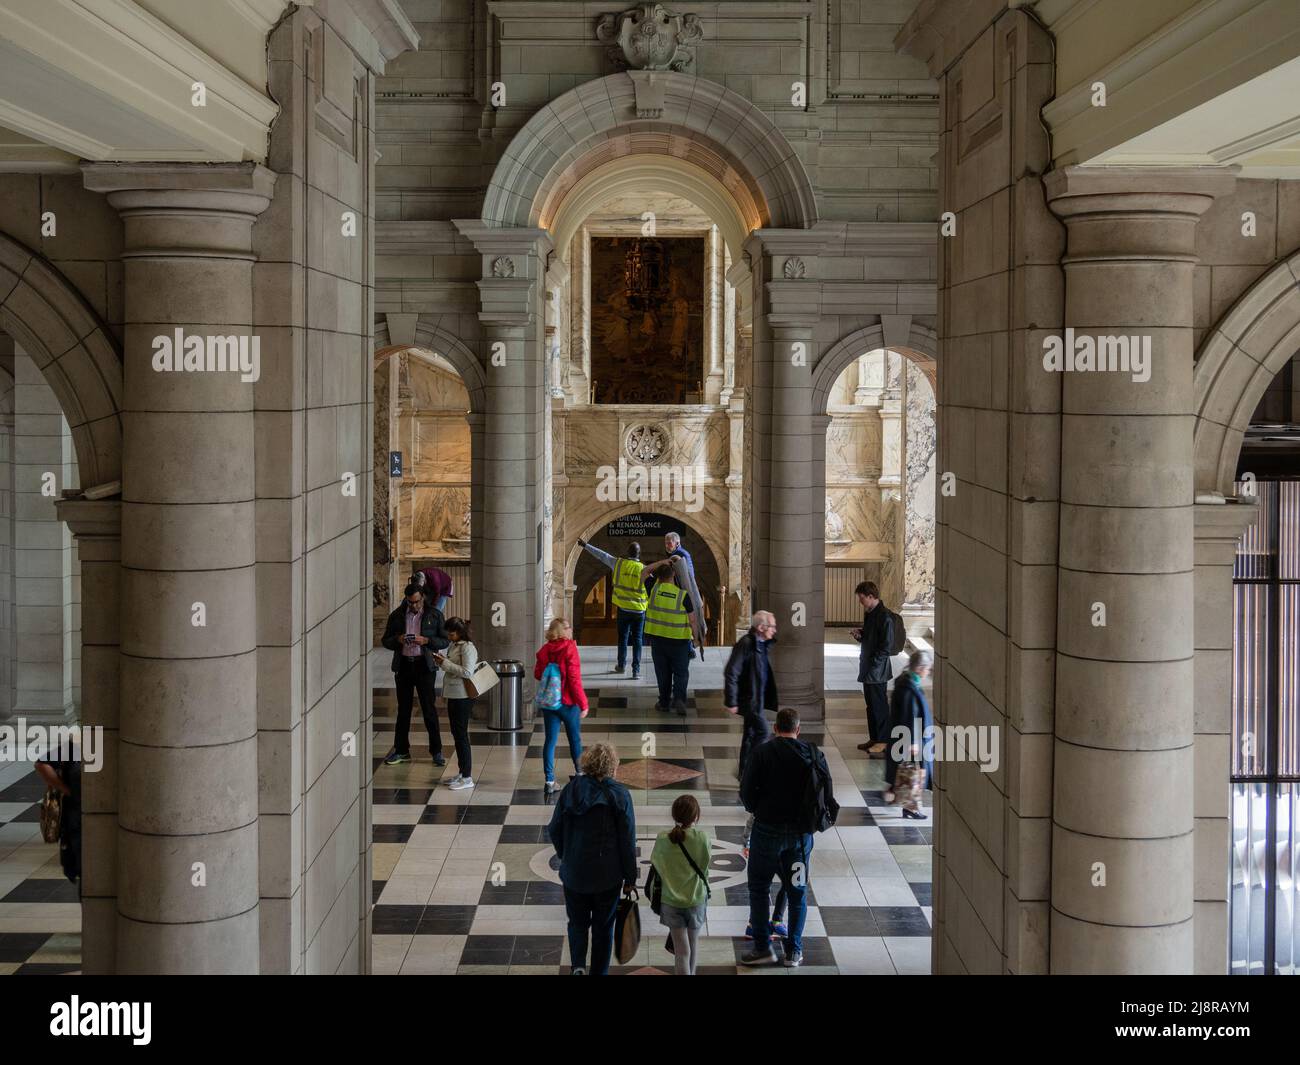 Classical architecture in the entrance hall to the Victoria and Albert Museum, South Kensington, London, UK Stock Photo